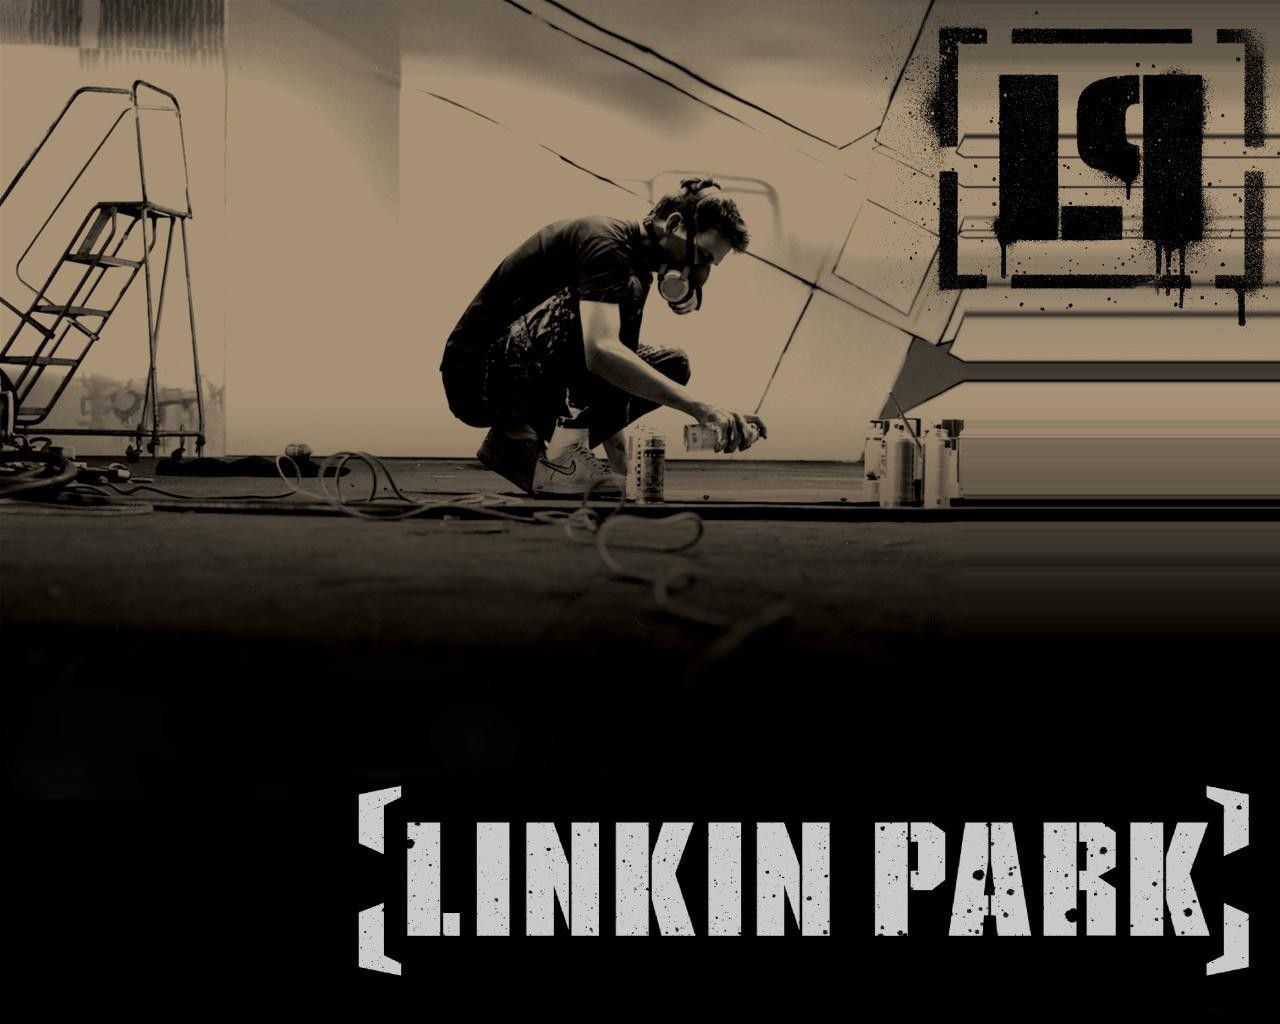 Hybrid Theory Wallpapers